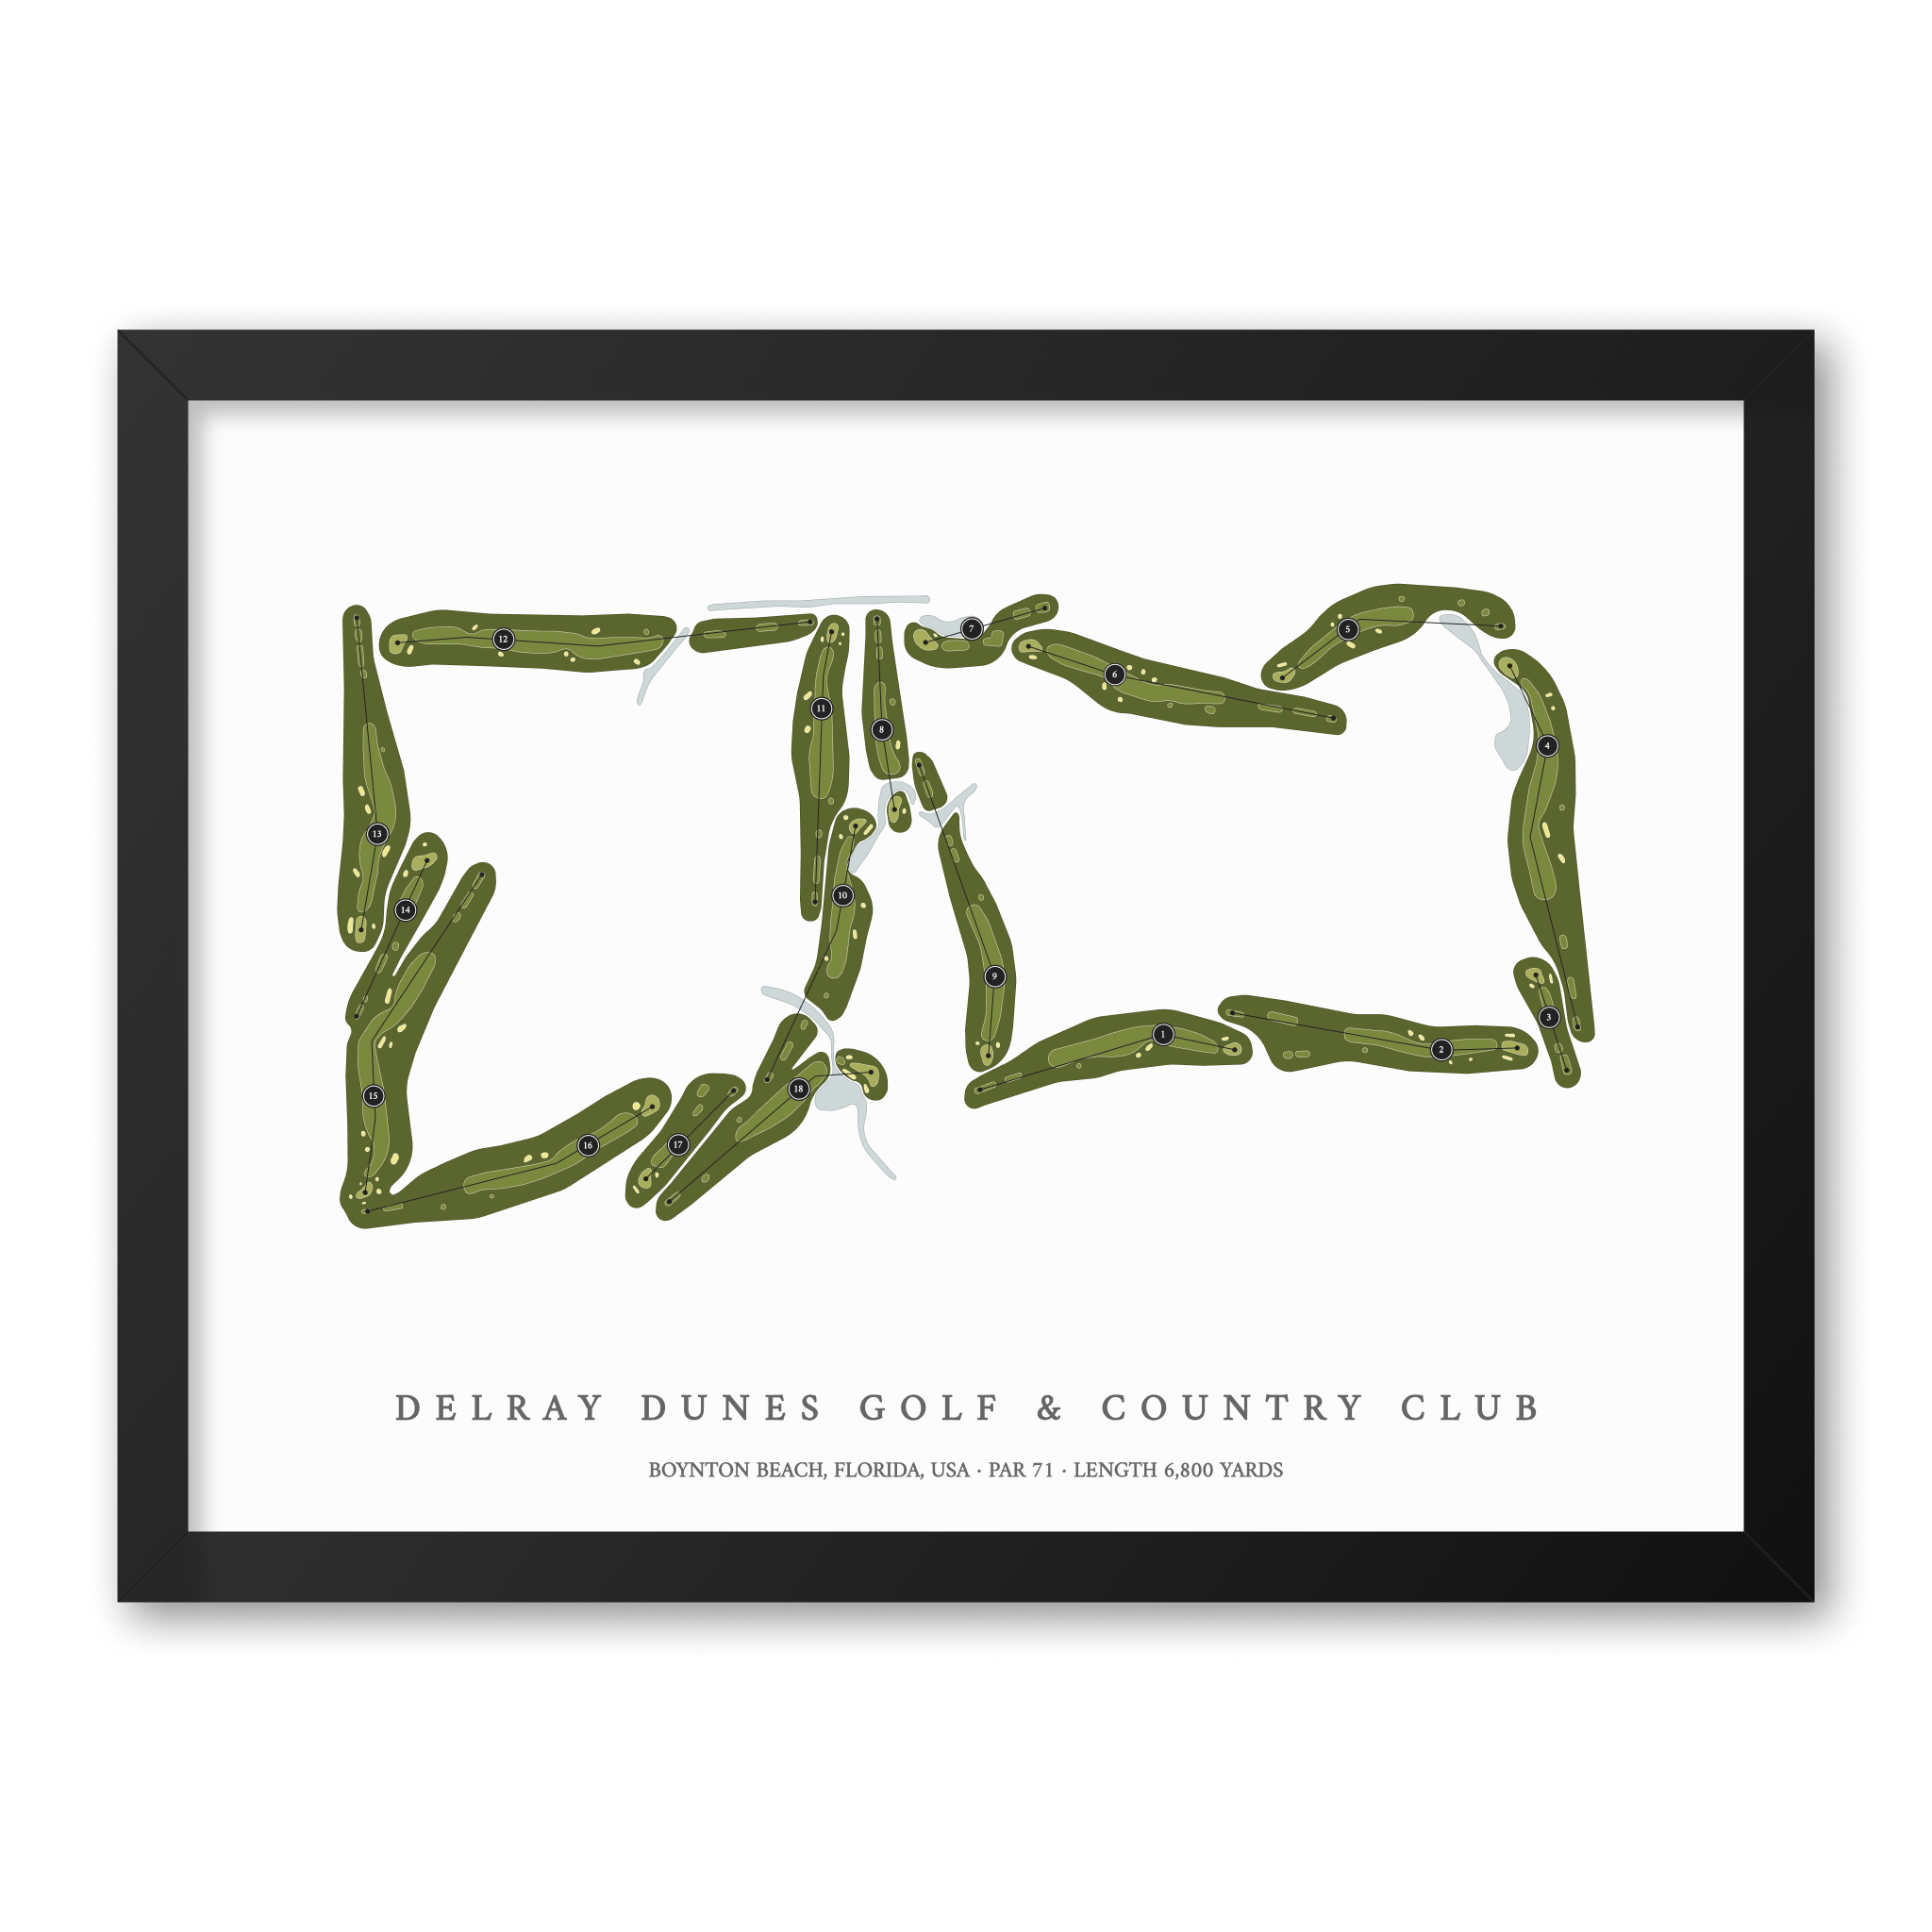 Delray Dunes Golf & Country Club | Golf Course Map | Black Frame With Hole Numbers #hole numbers_yes